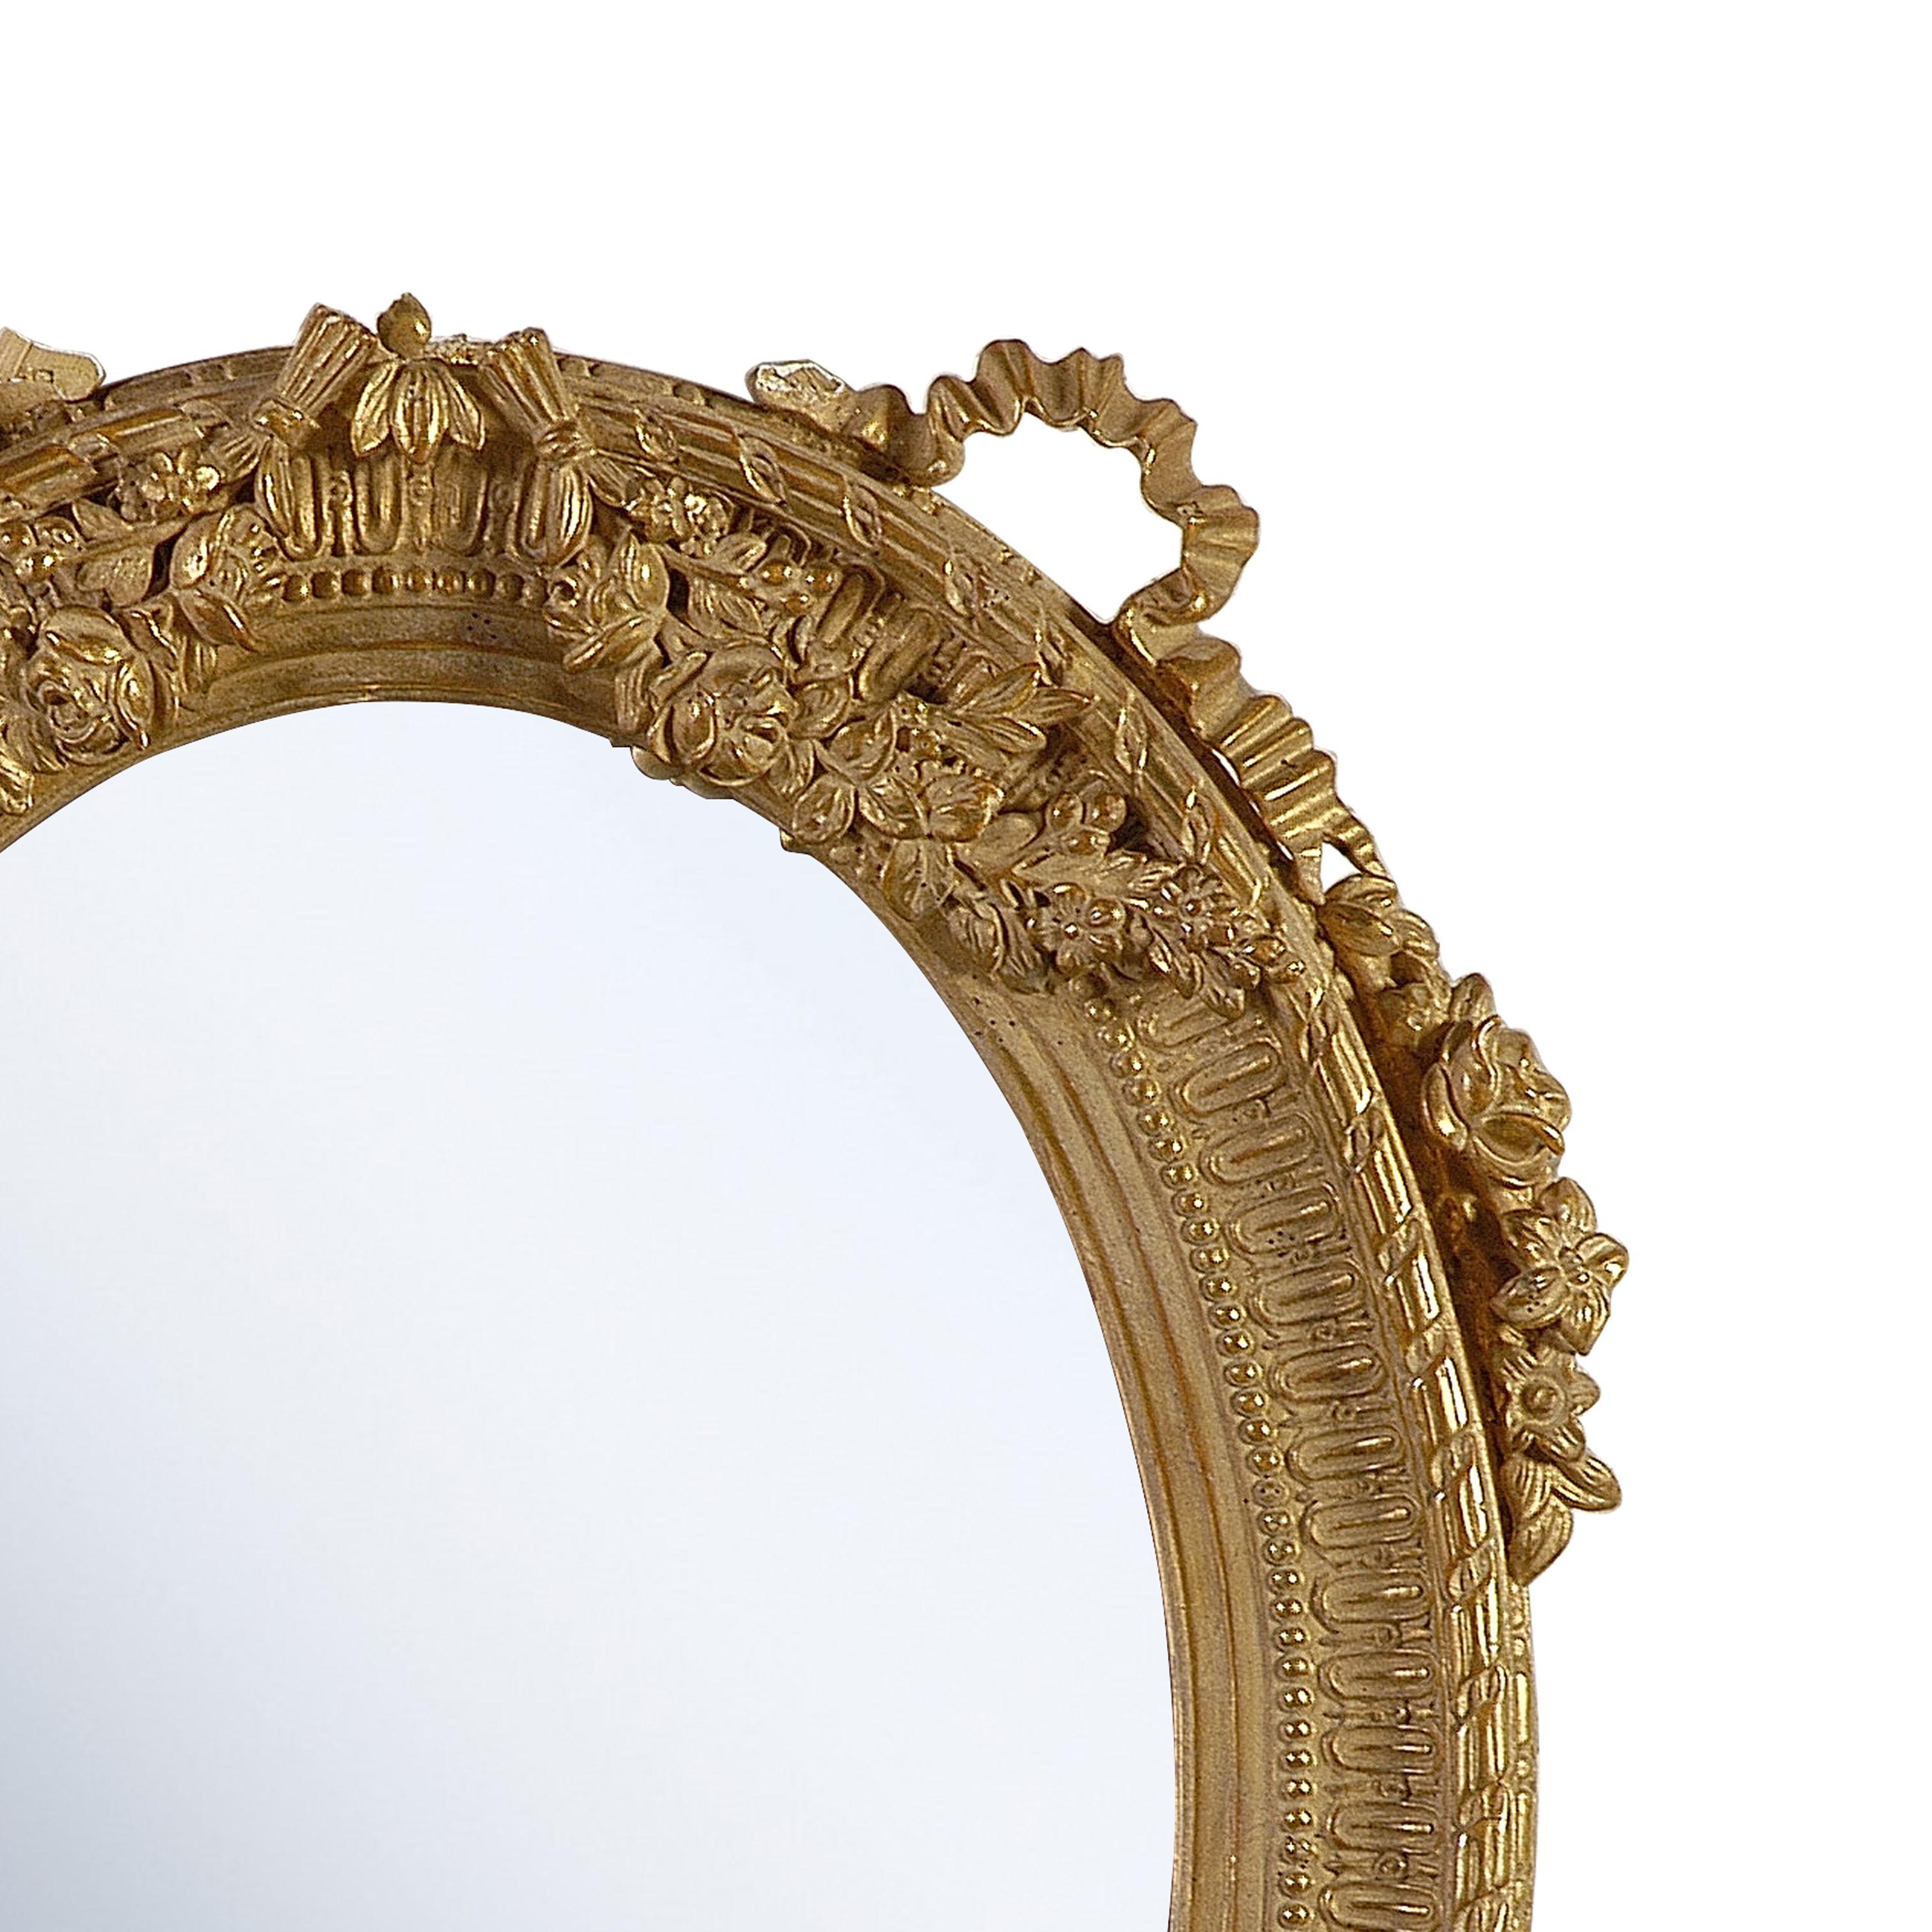 Neoclassical Regency style handcrafted mirror. Round, hand carved wooden structure with gold foil finished, Spain, 1970.